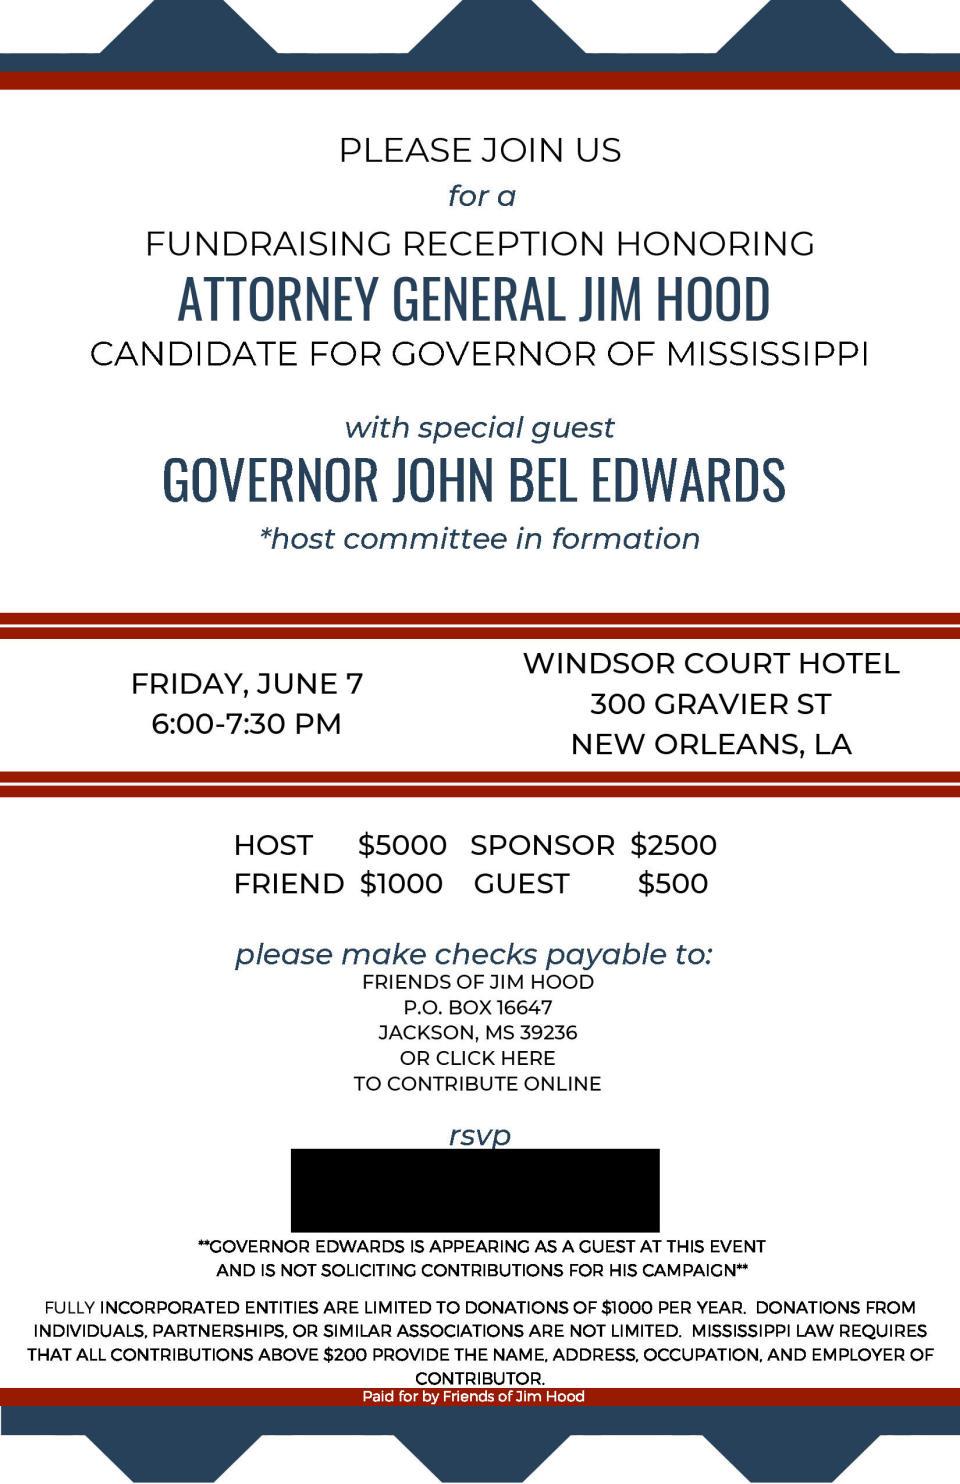 An invitation to a fundraiser hosted by Louisiana Gov. John Bel Edwards for Mississippi Attorney General Jim Hood.&nbsp; (Photo: HuffPost)